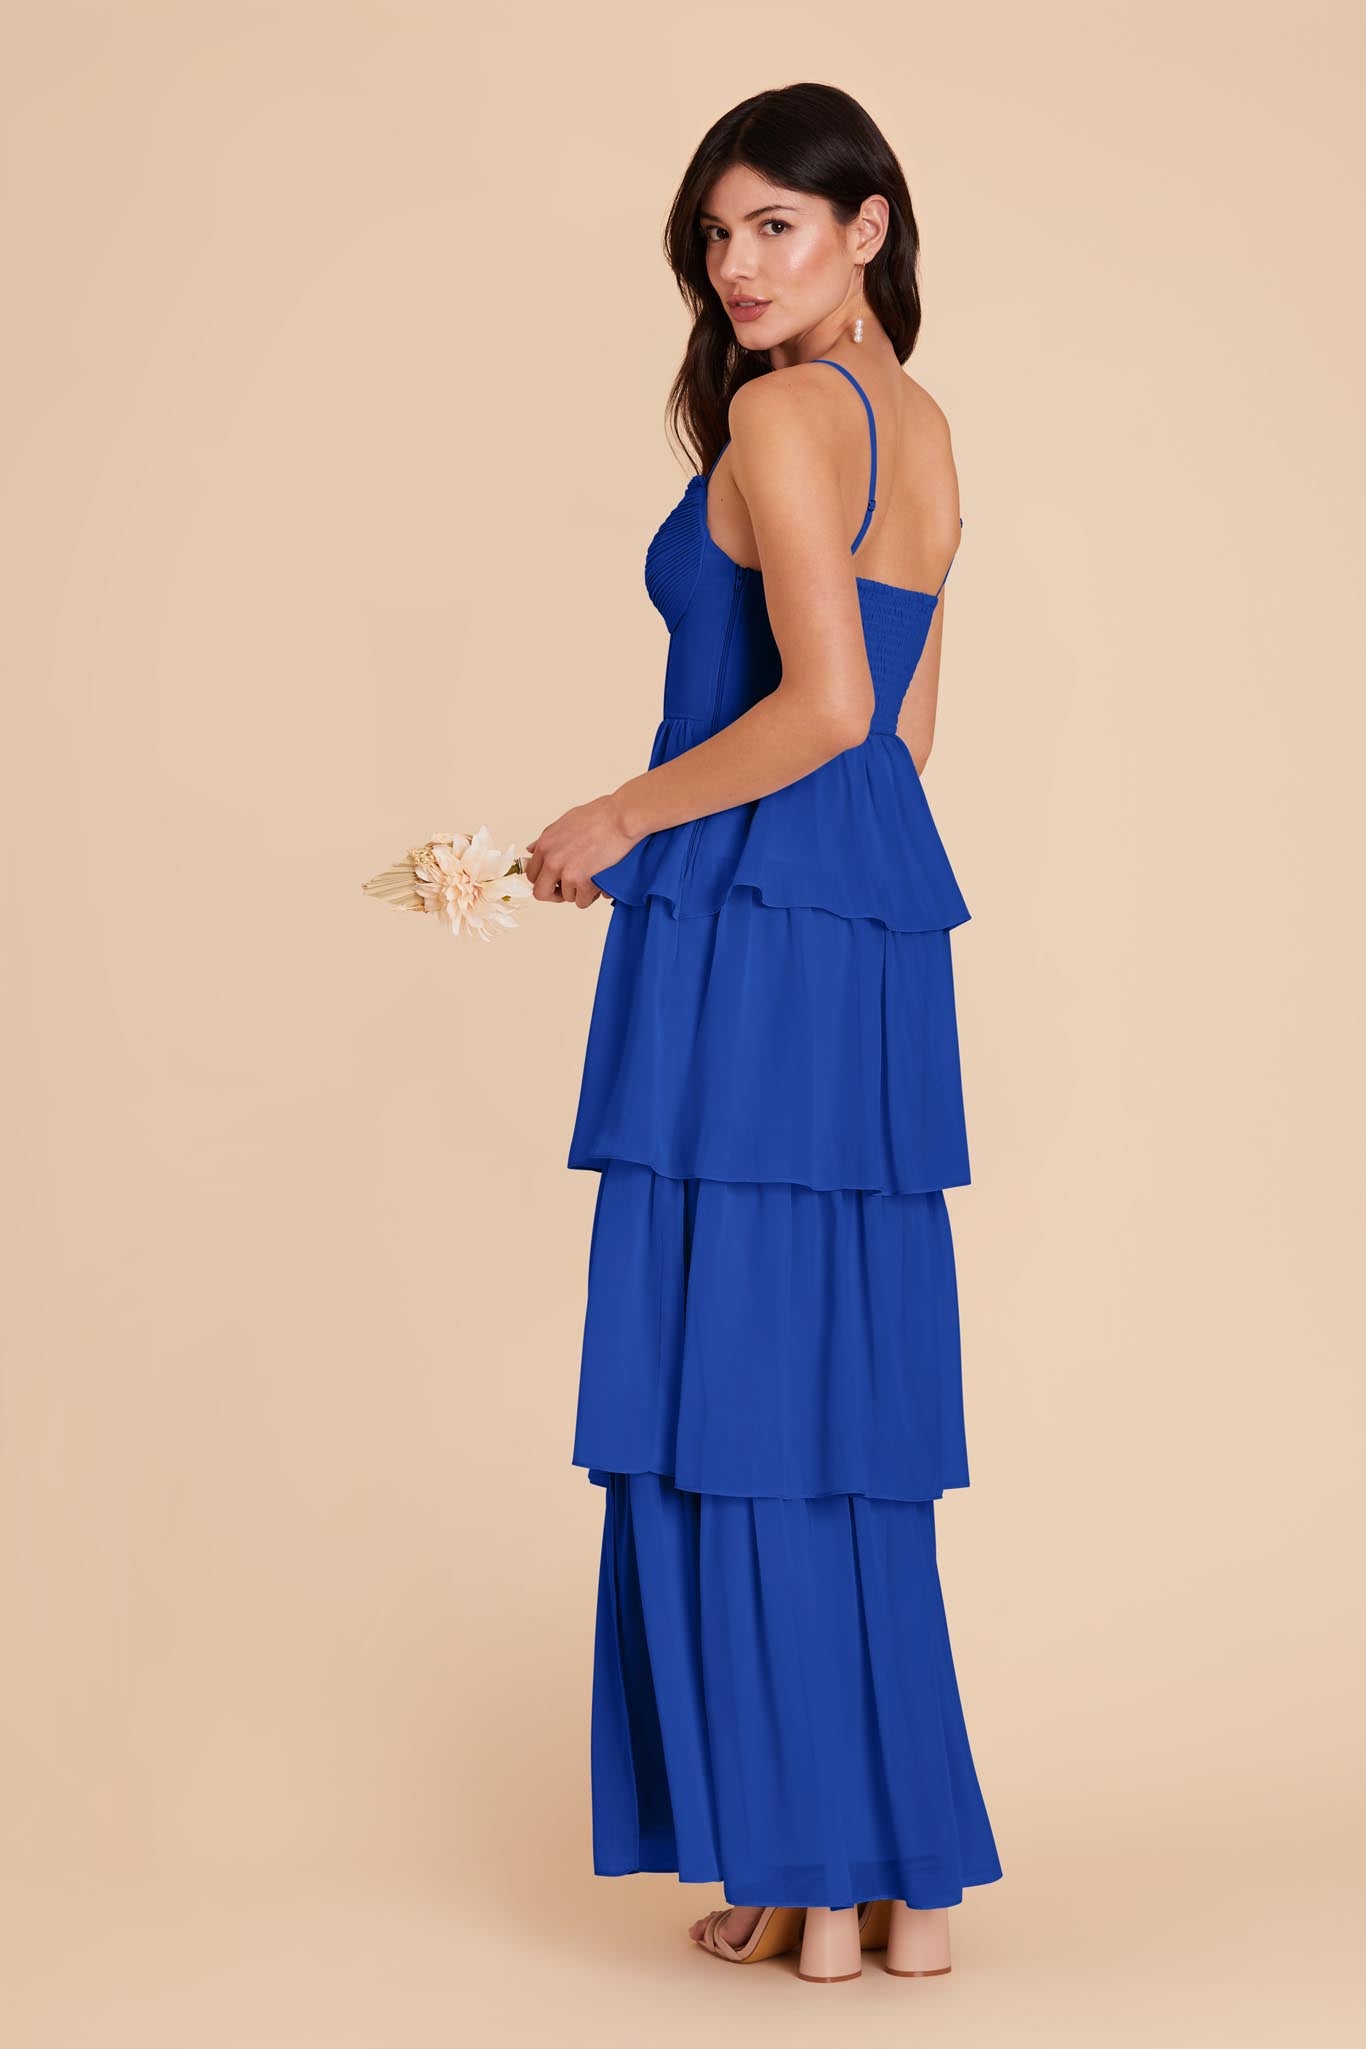 Going with Elegance Navy Blue Satin Tiered Maxi Dress